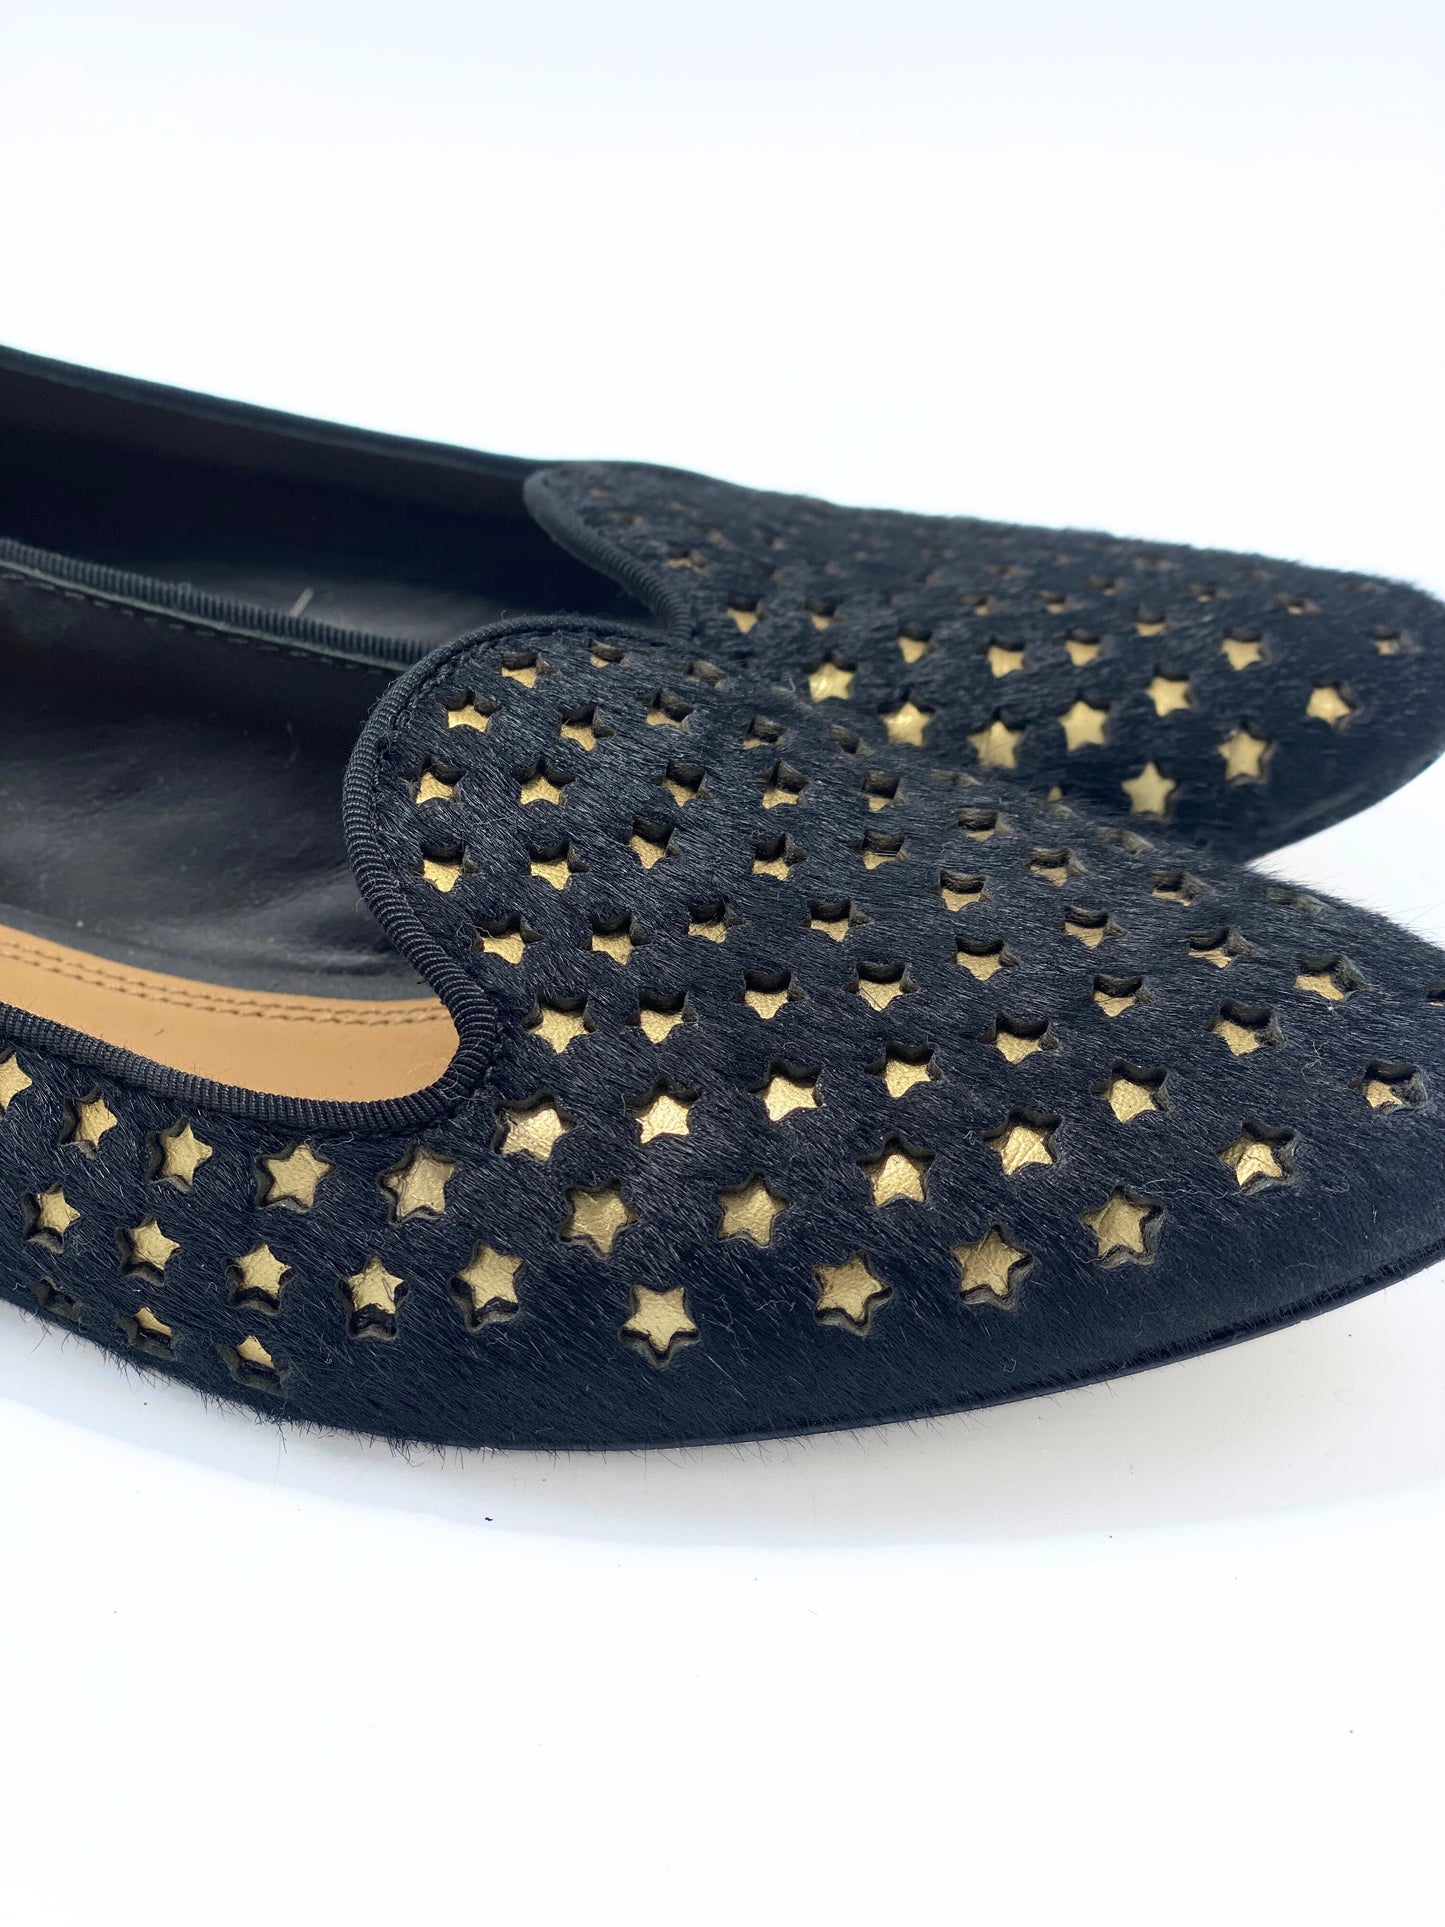 Chatita Tory Burch Olympia Loafer (US 8)